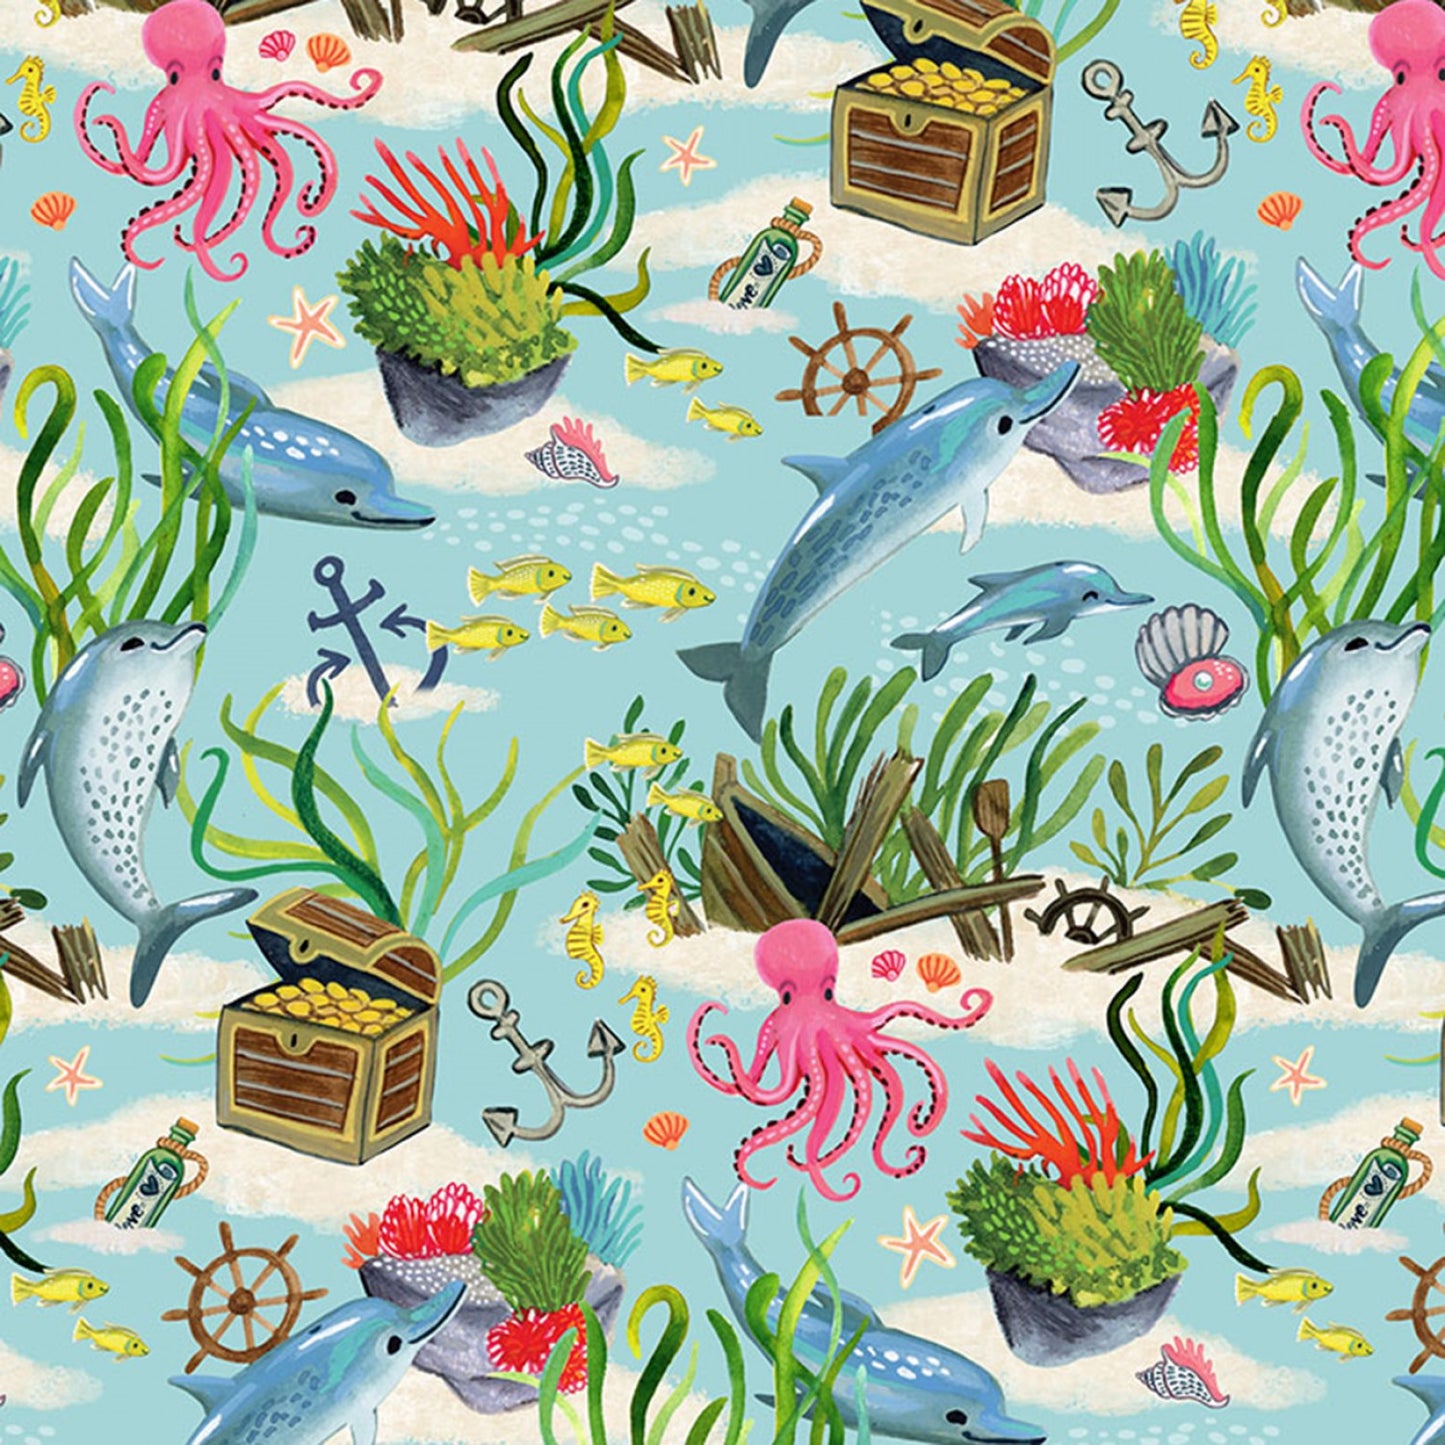 You're A Catch by Miriam Bos You're A Catch ST-DMB2141MULTI Cotton Woven Fabric